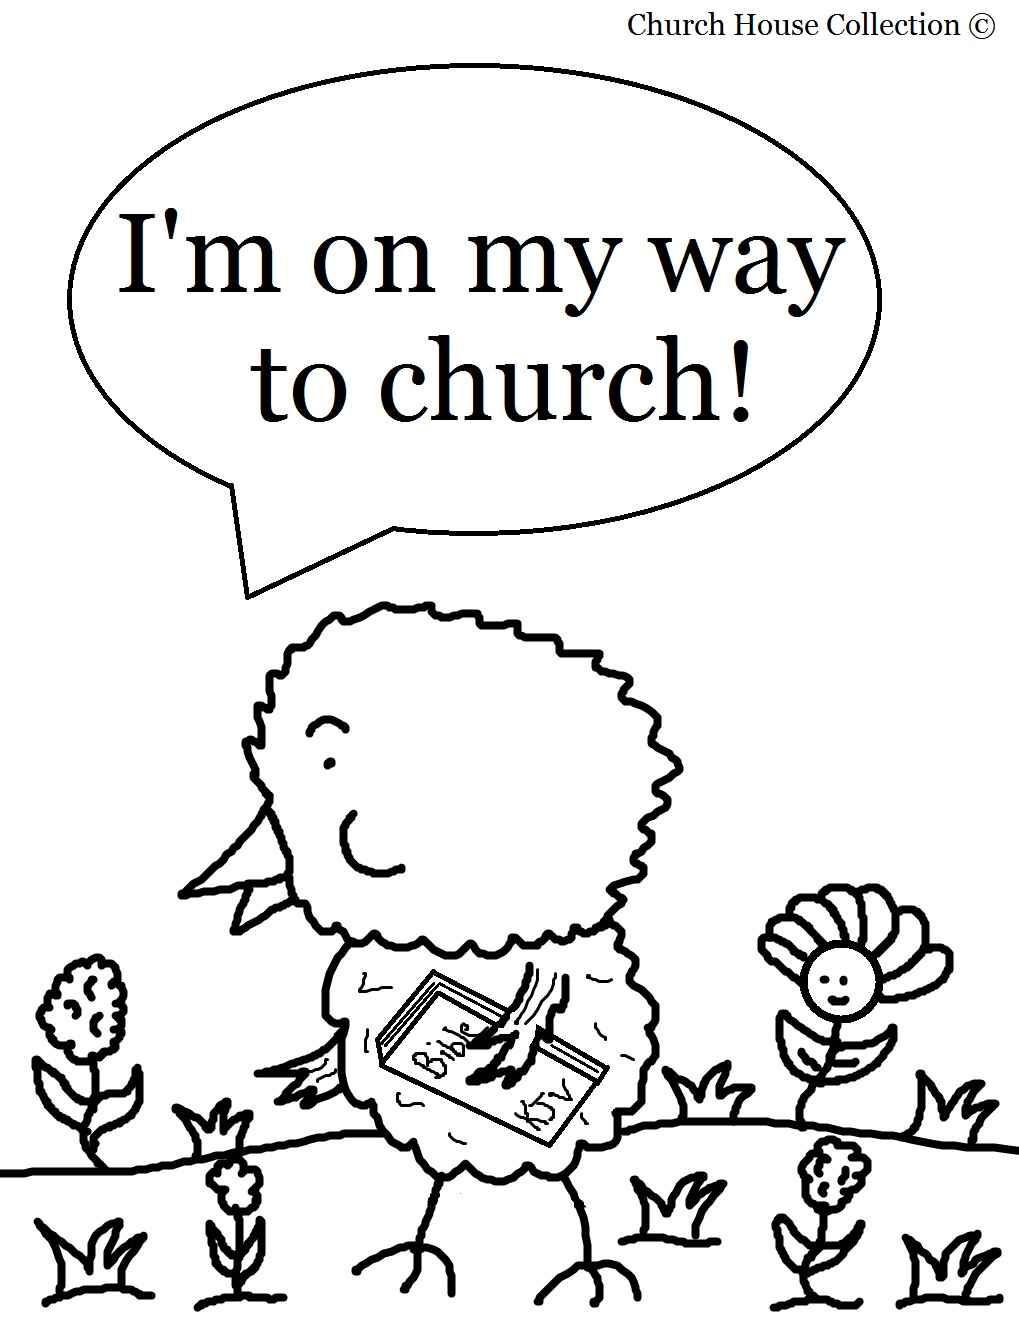 church-house-collection-blog-easter-chick-coloring-page-for-sunday